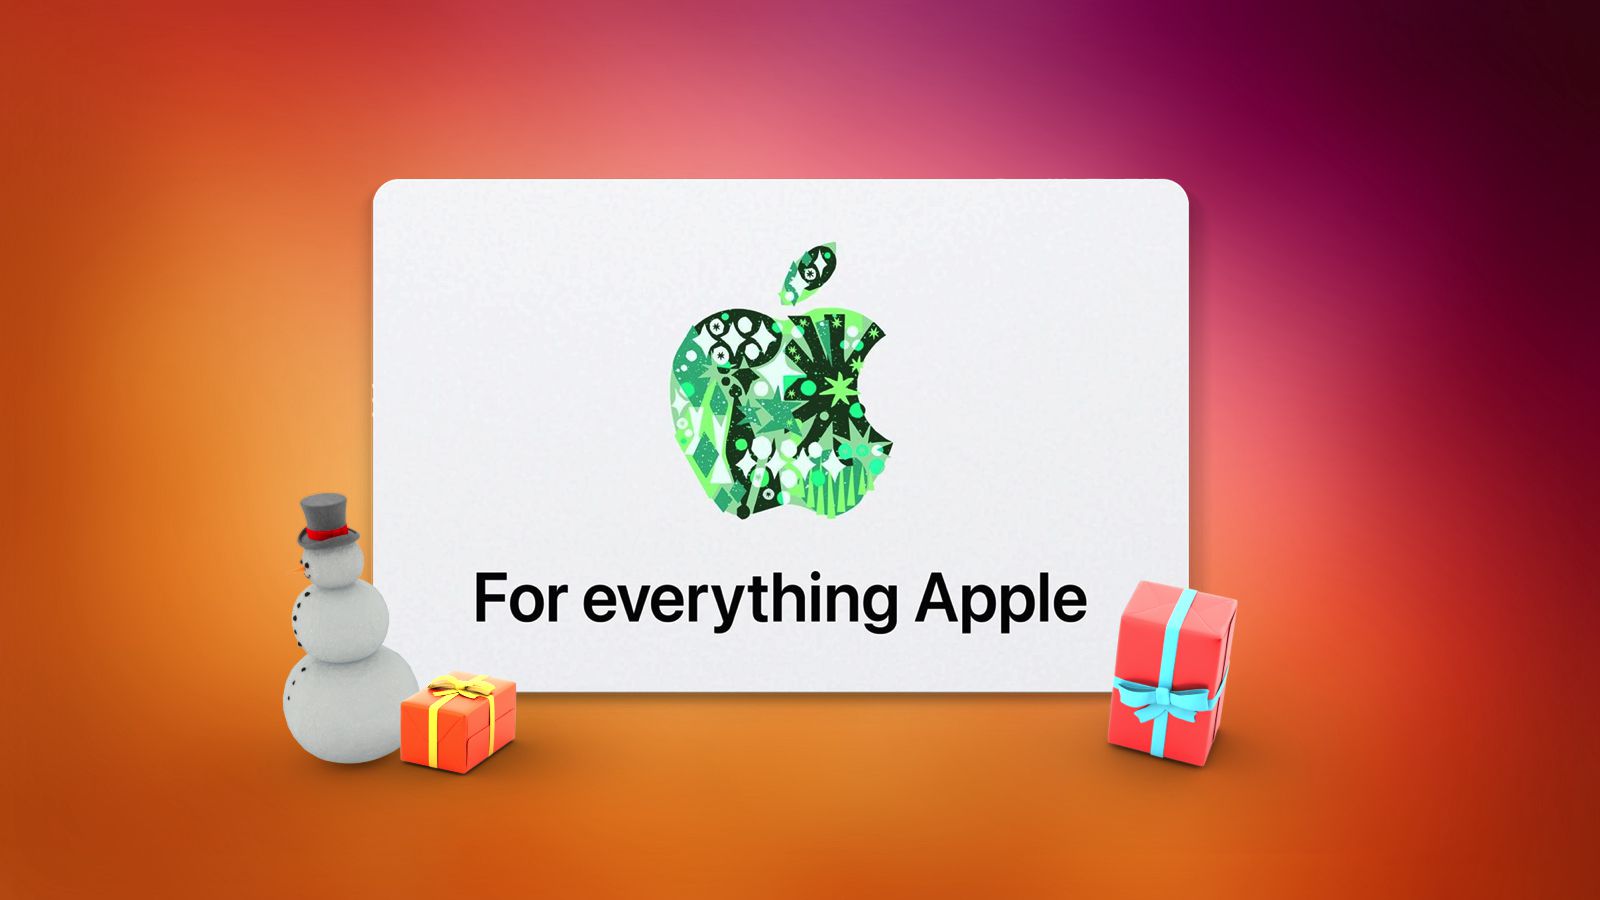 What to Buy With Apple Gift Card You Unwrapped - MacRumors